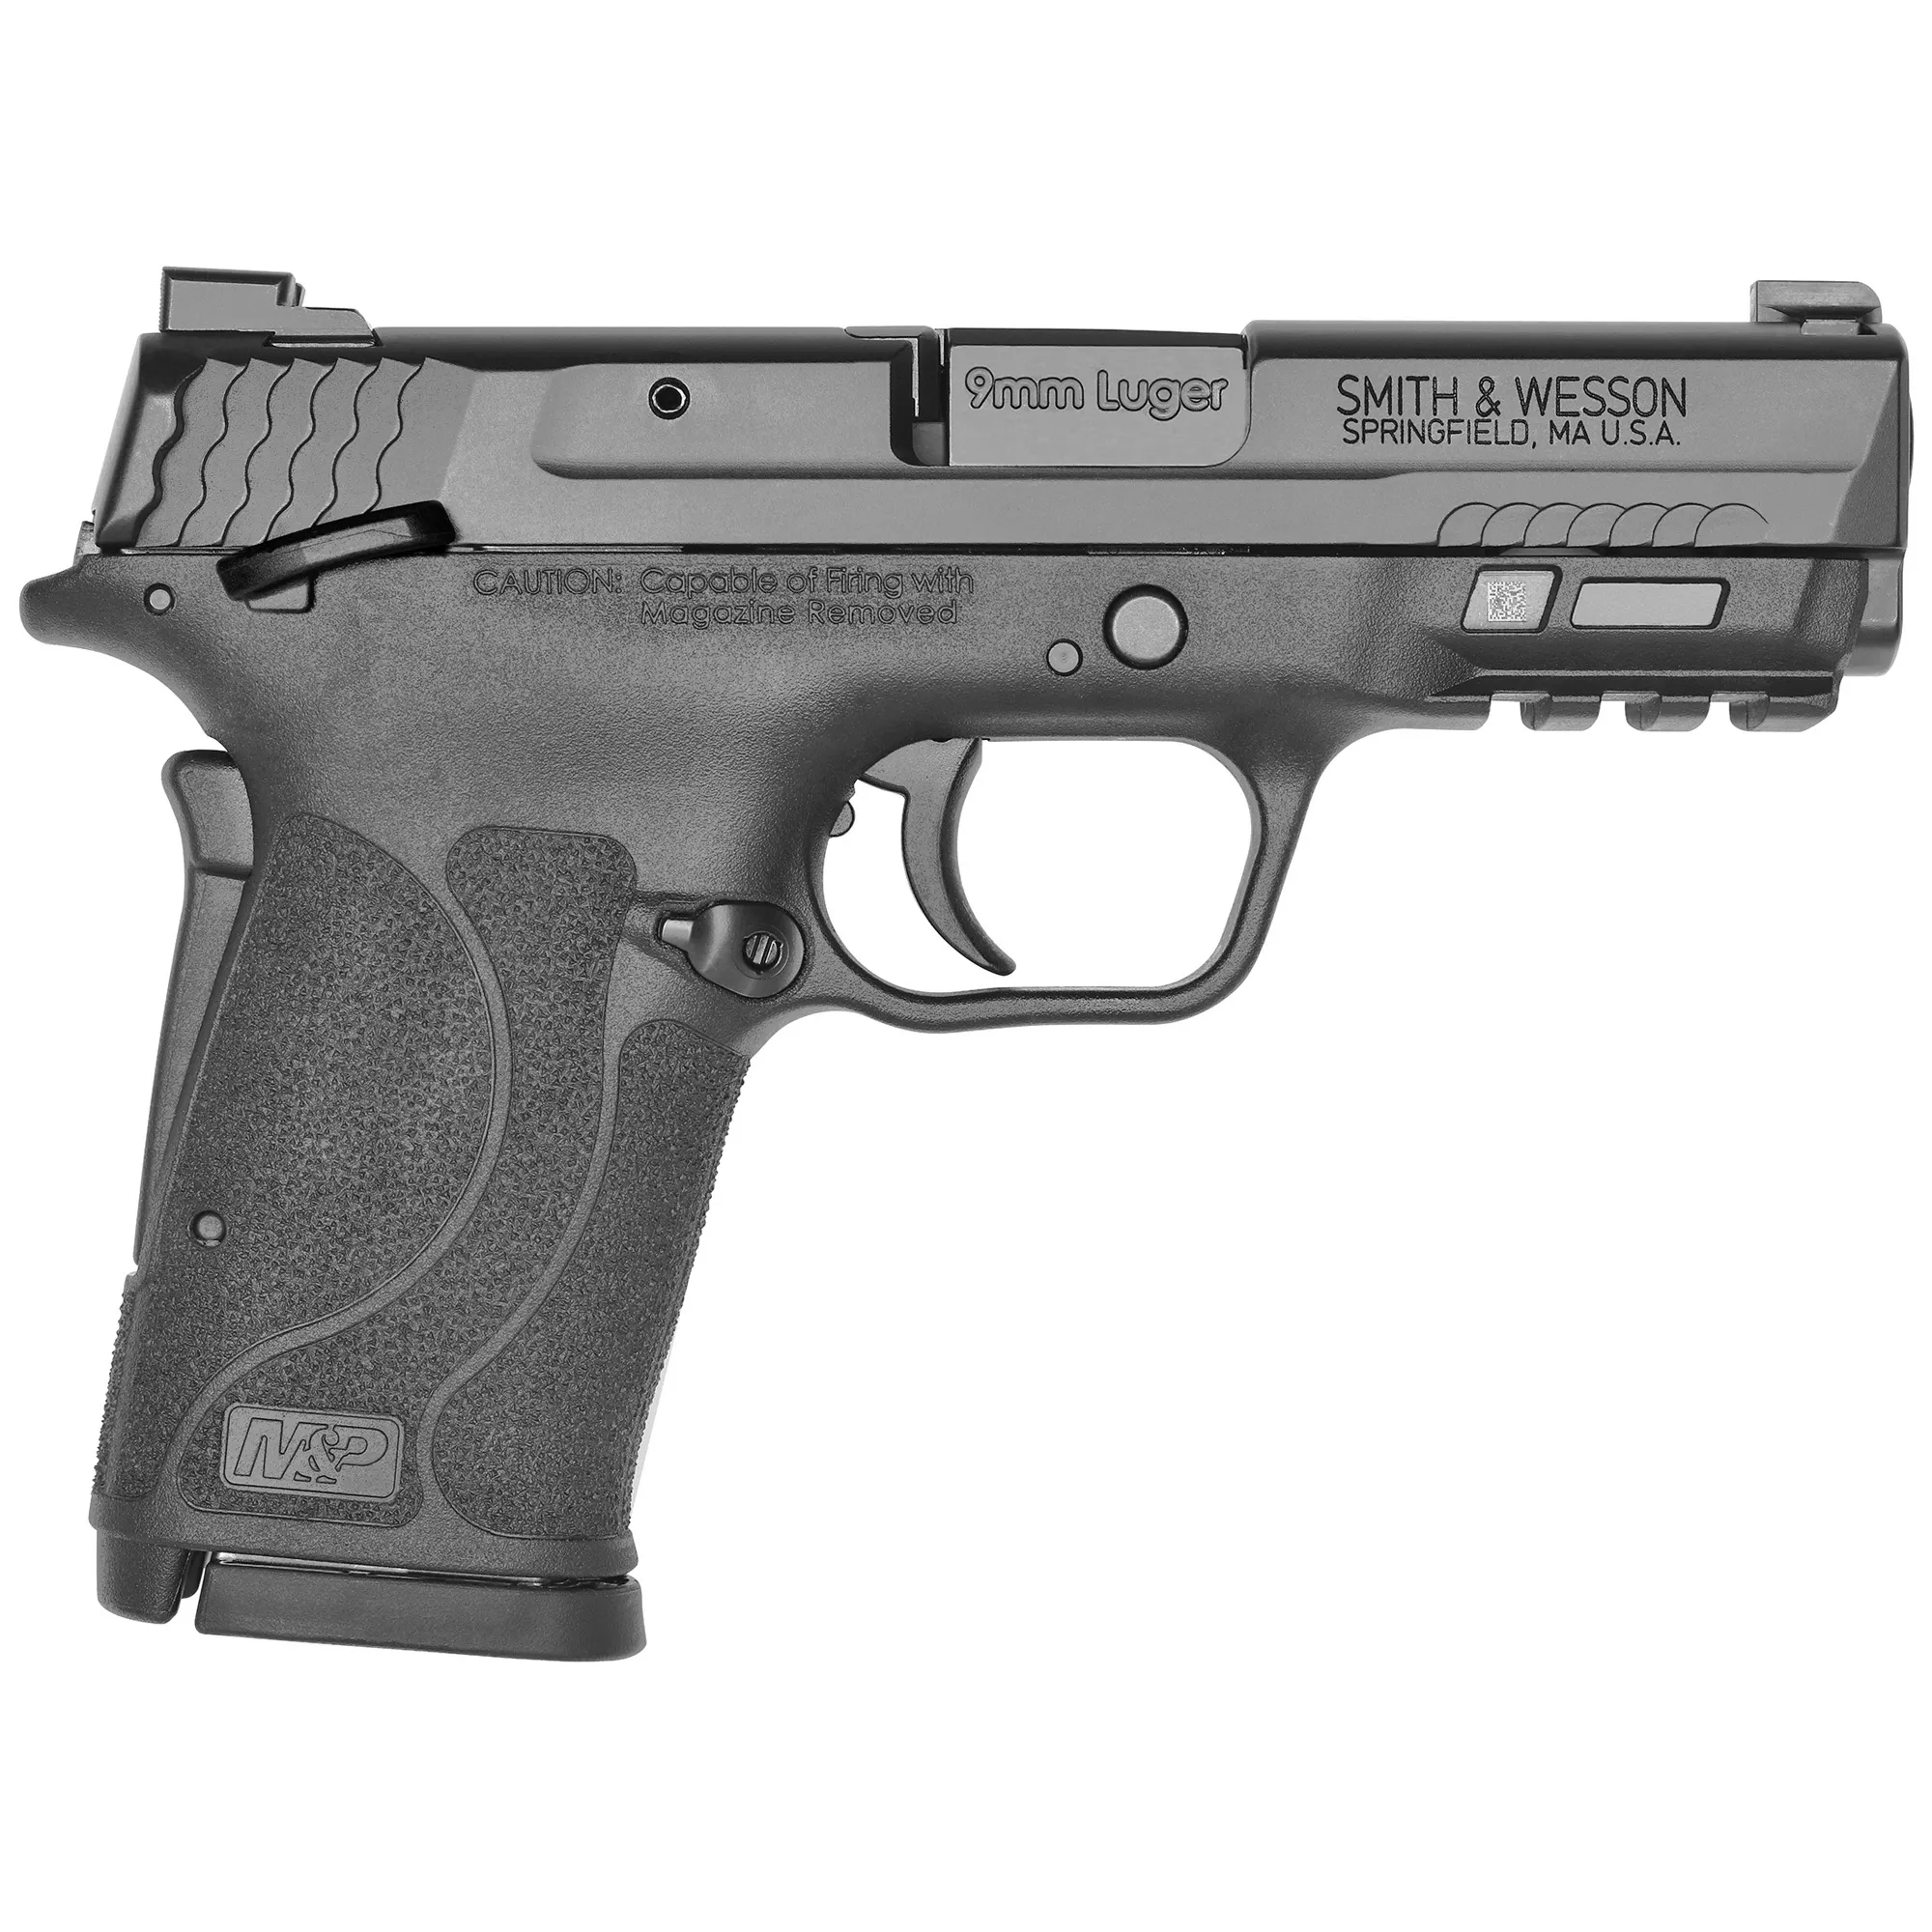 Smith and Wesson M&P9 Shield EZ 9mm 3.6" Barrel 8-Rounds Night Sights - $517.99 ($7.99 S/H on Firearms)